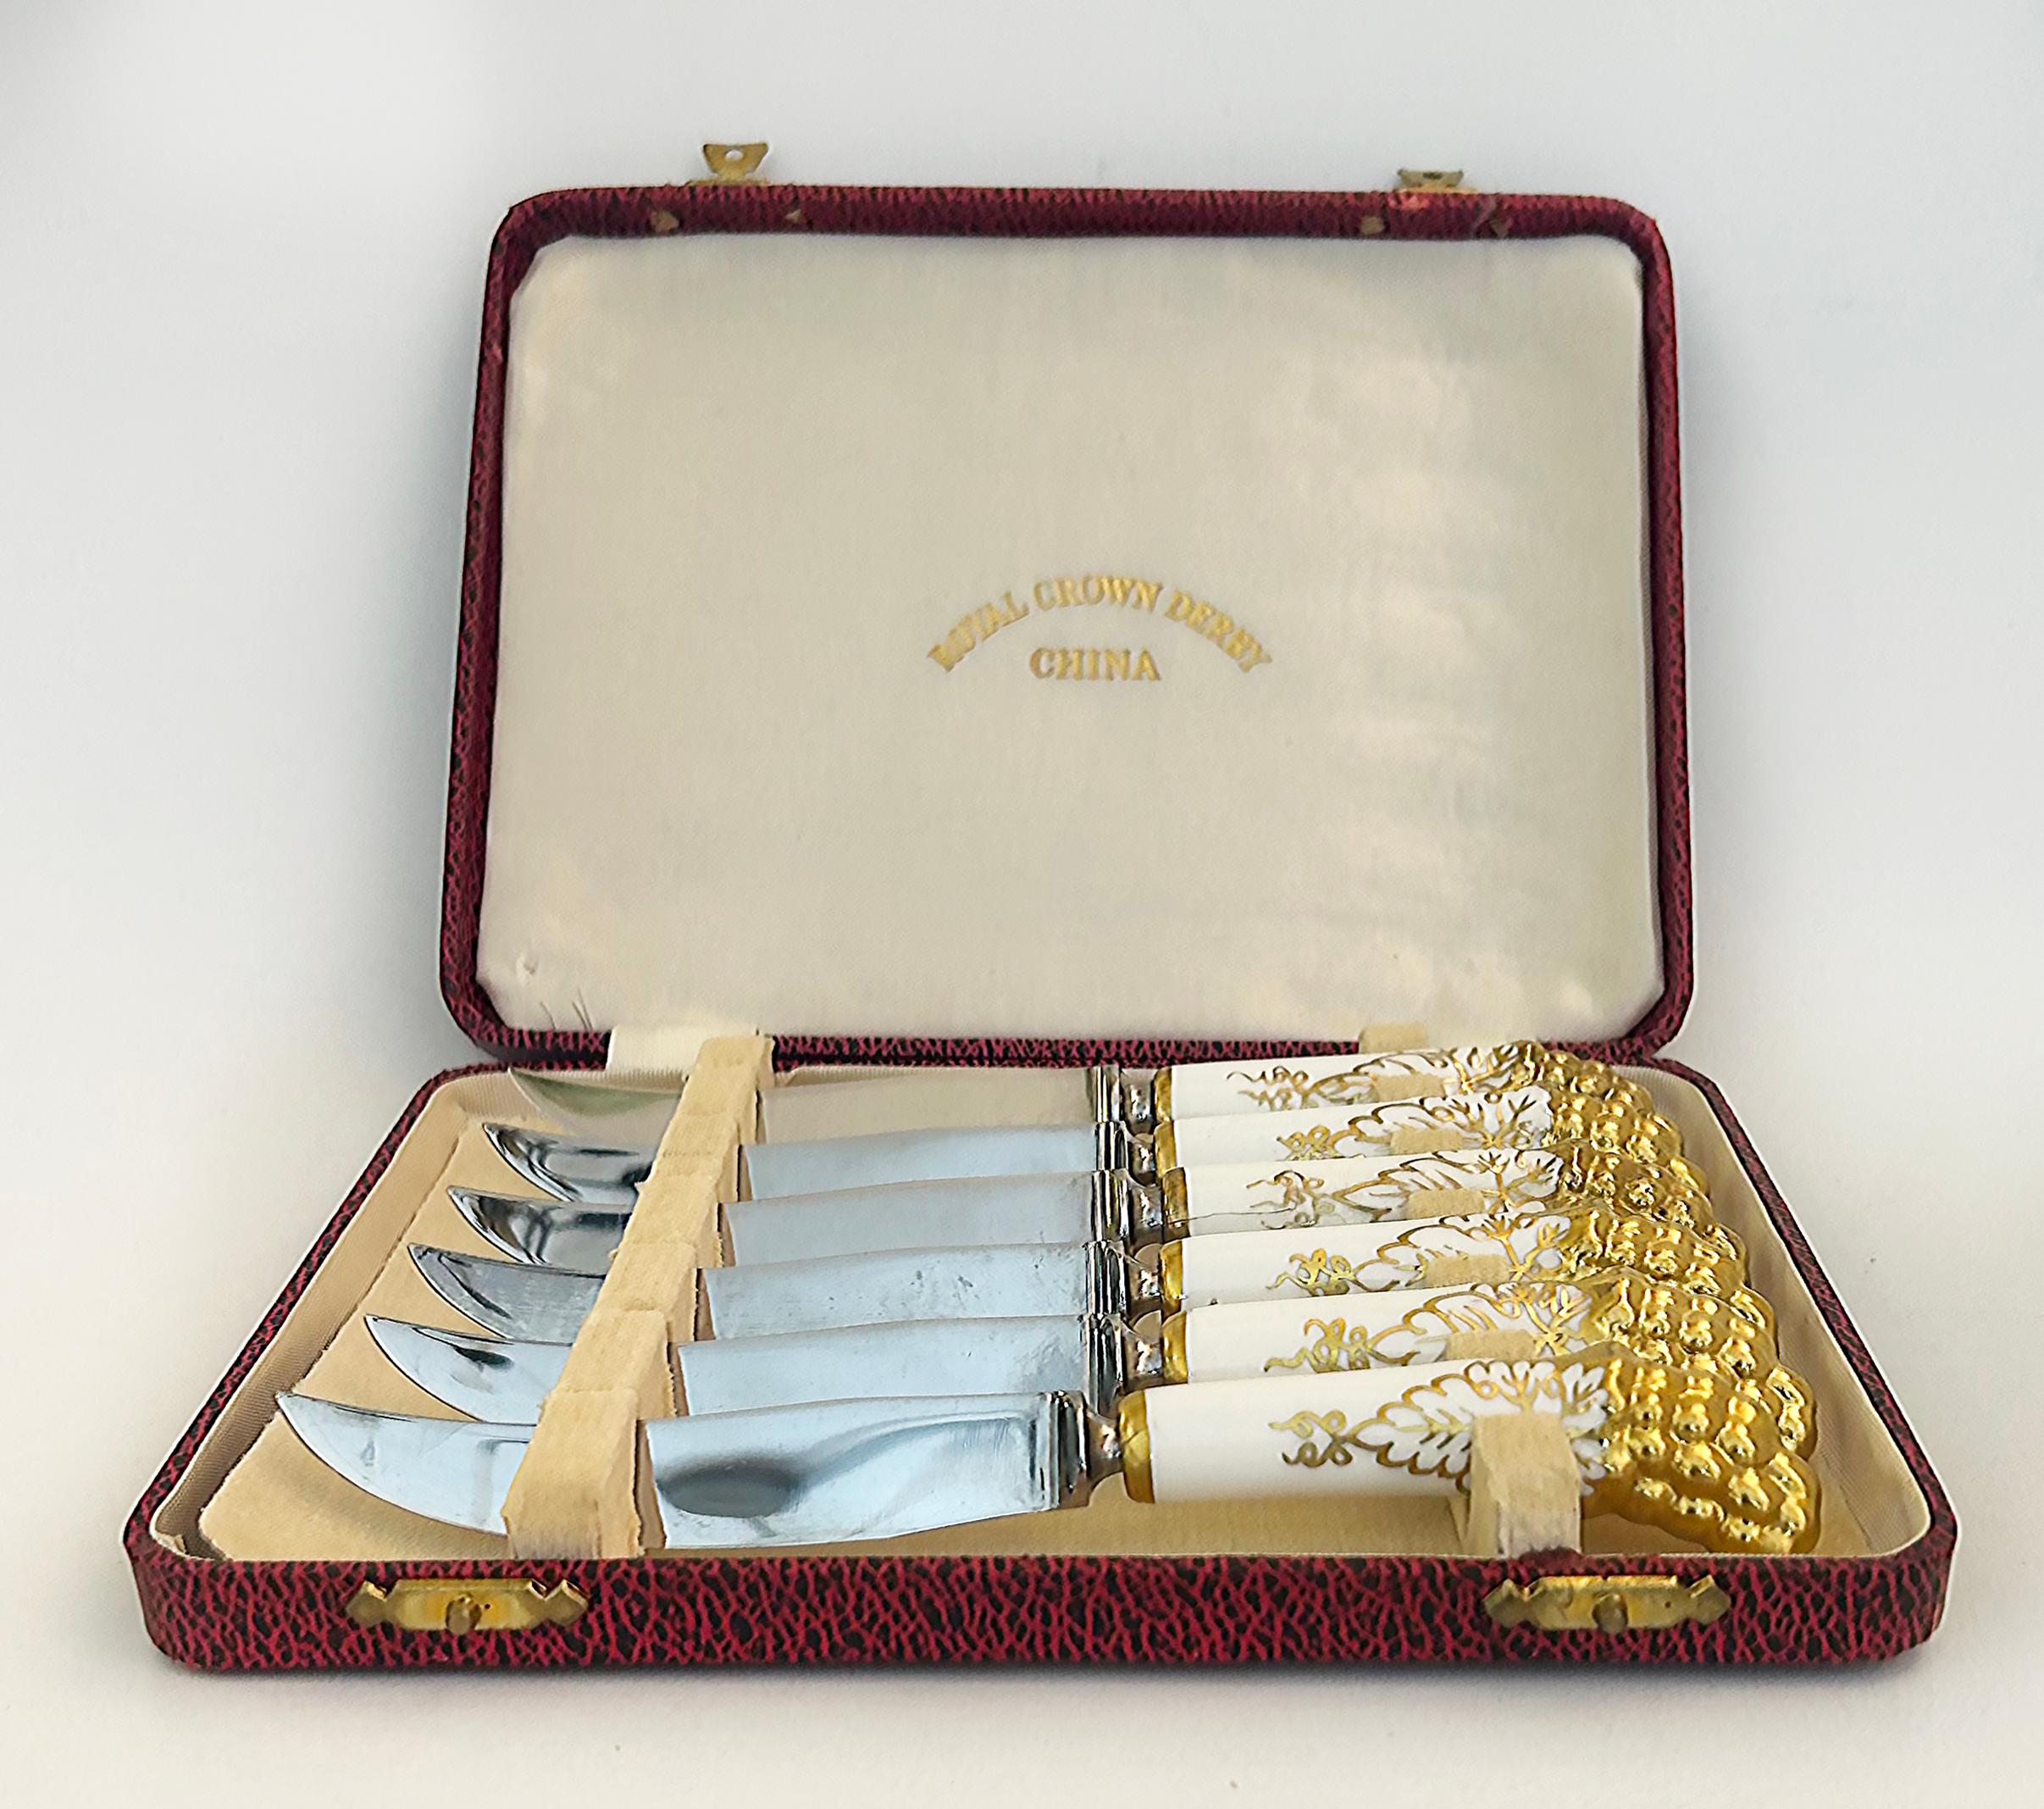 Royal Crown Derby Porcelain, Stainless Fruit Knives Set, Grapes, Leather Box For Sale 4